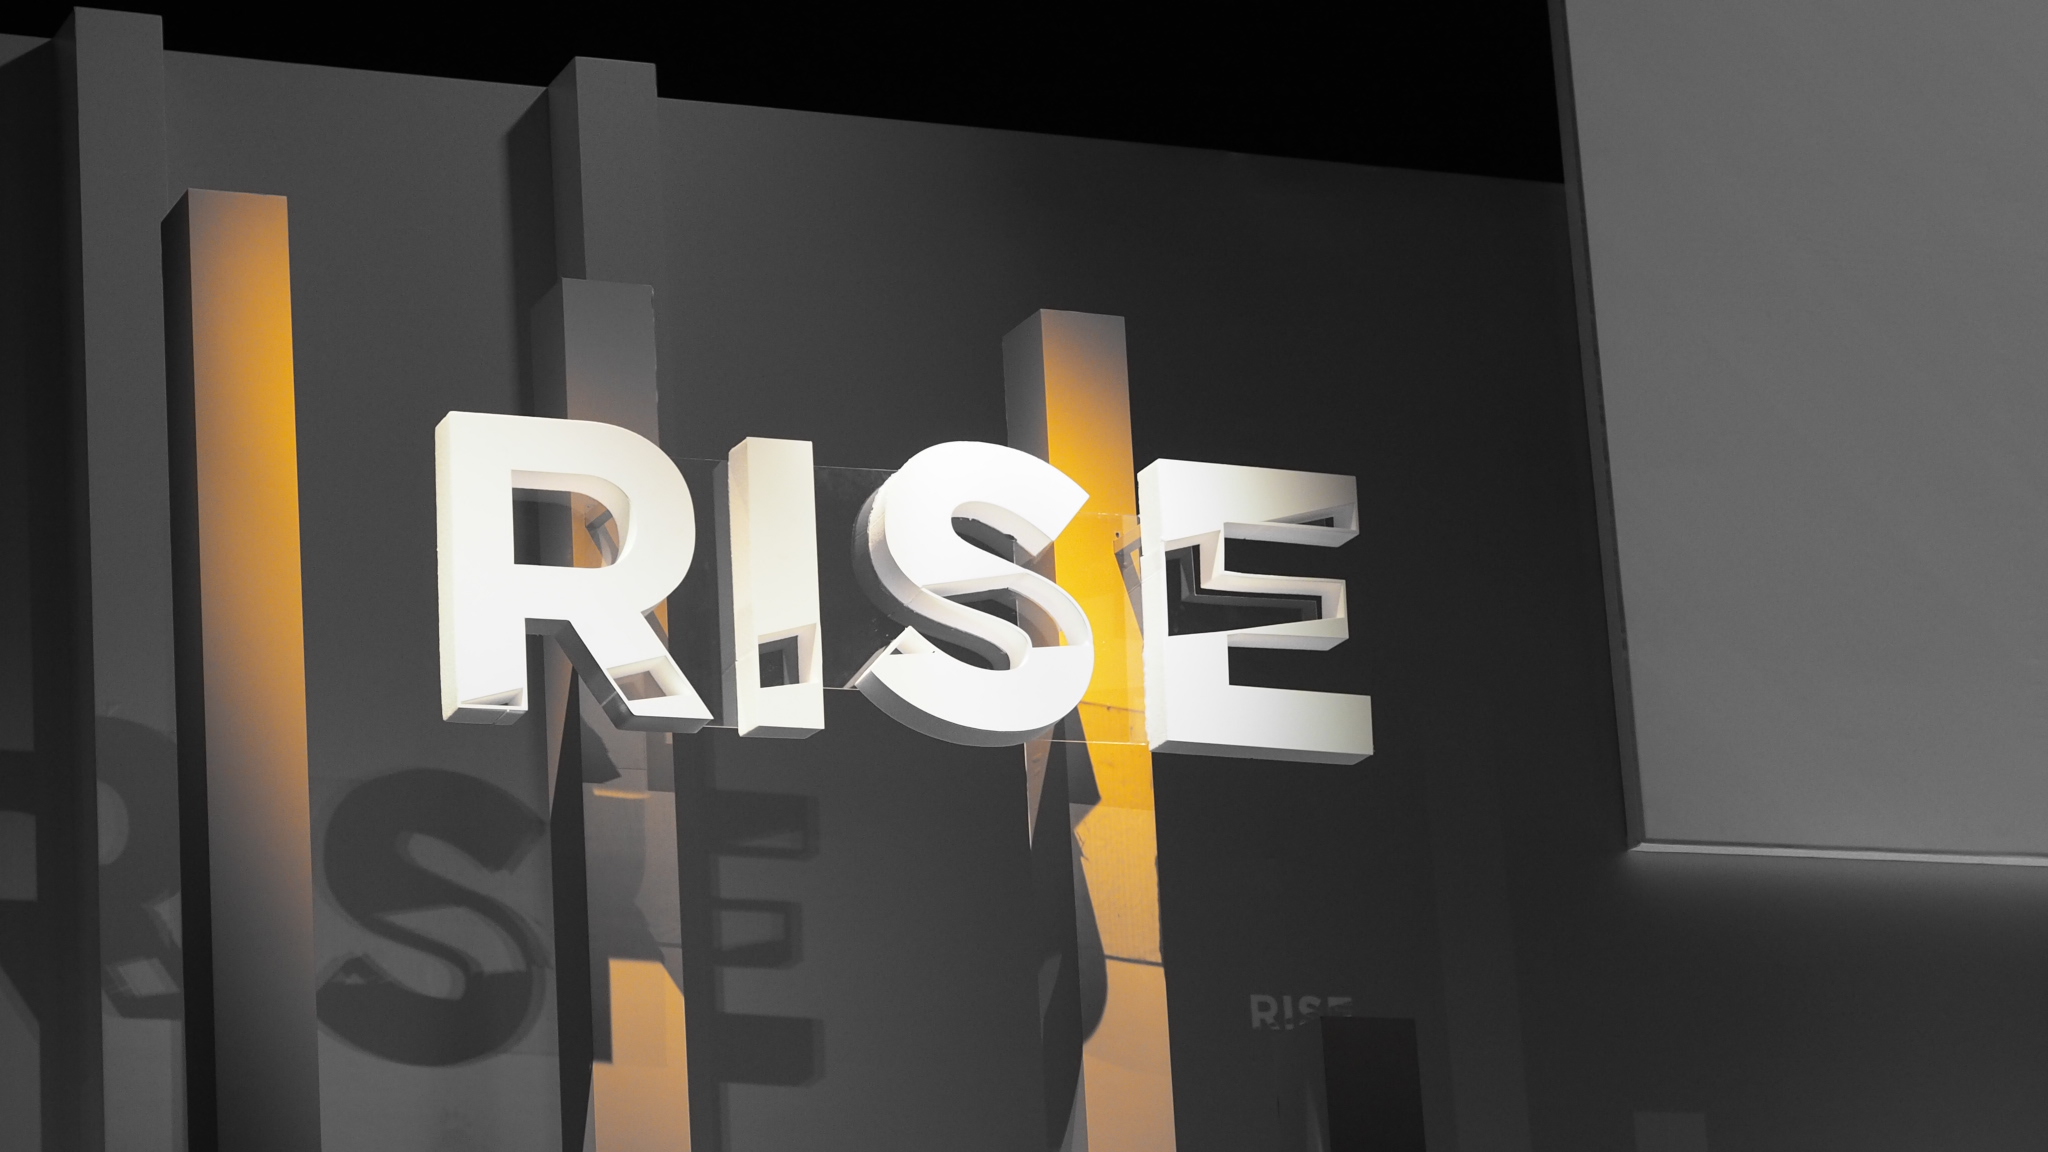 RISE 2018 is bringing to Hong Kong professionals from the world's biggest companies and start-ups 